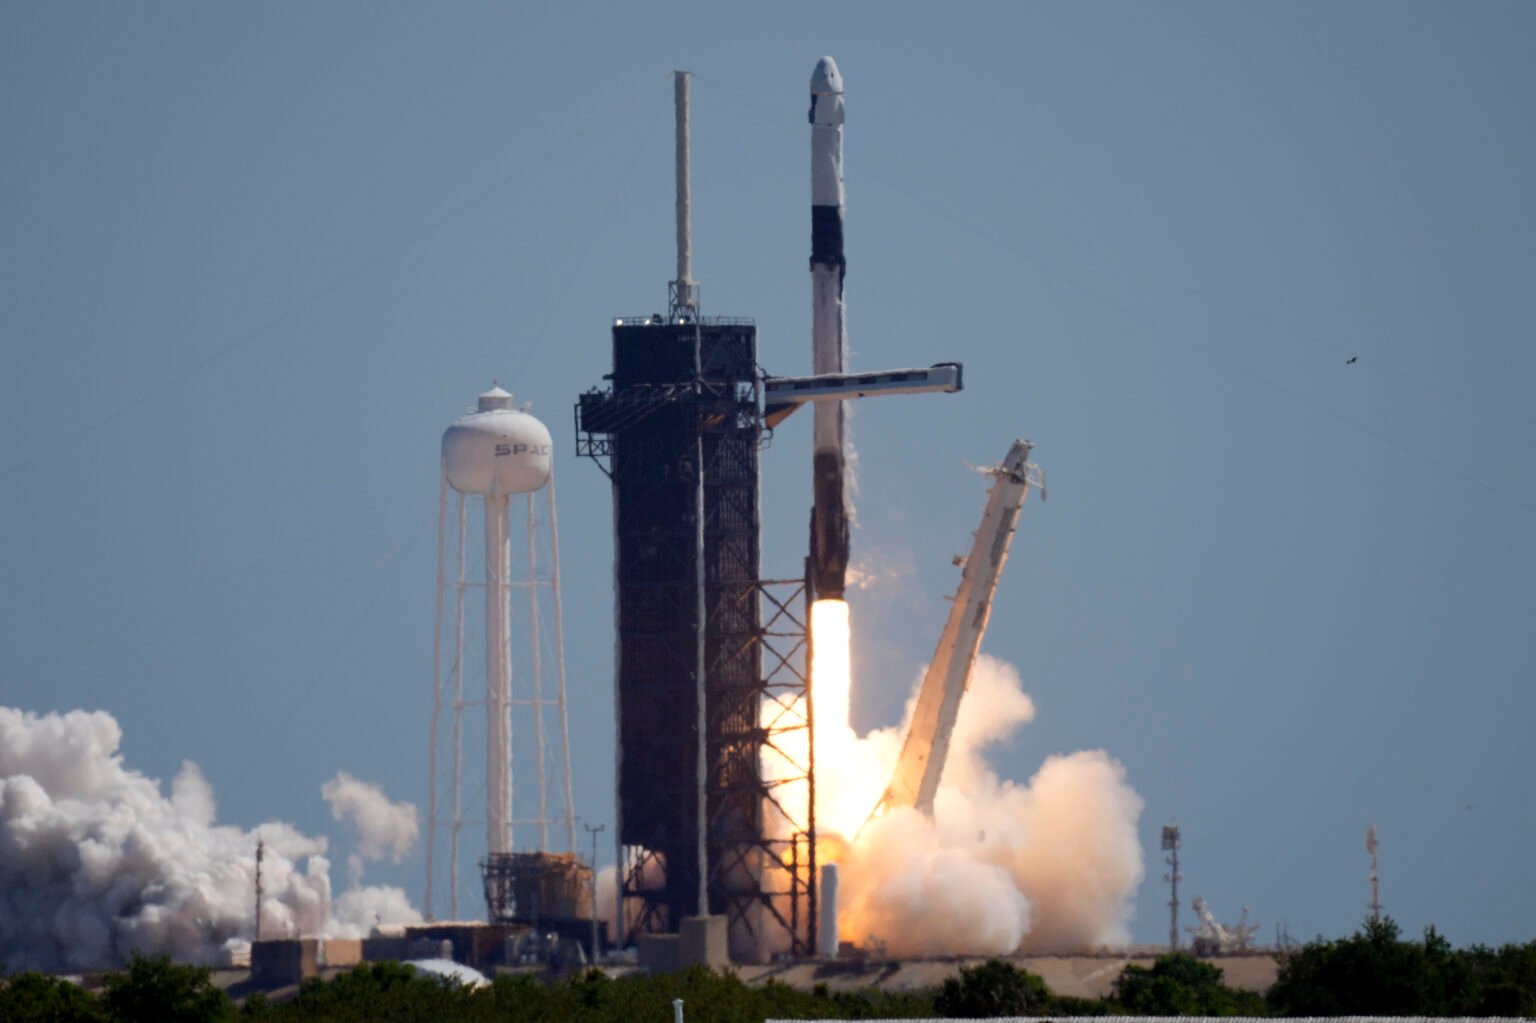 spacex-sent-starship-to-orbit-—-the-next-launch-will-try-to-bring-it-back-|-techcrunch